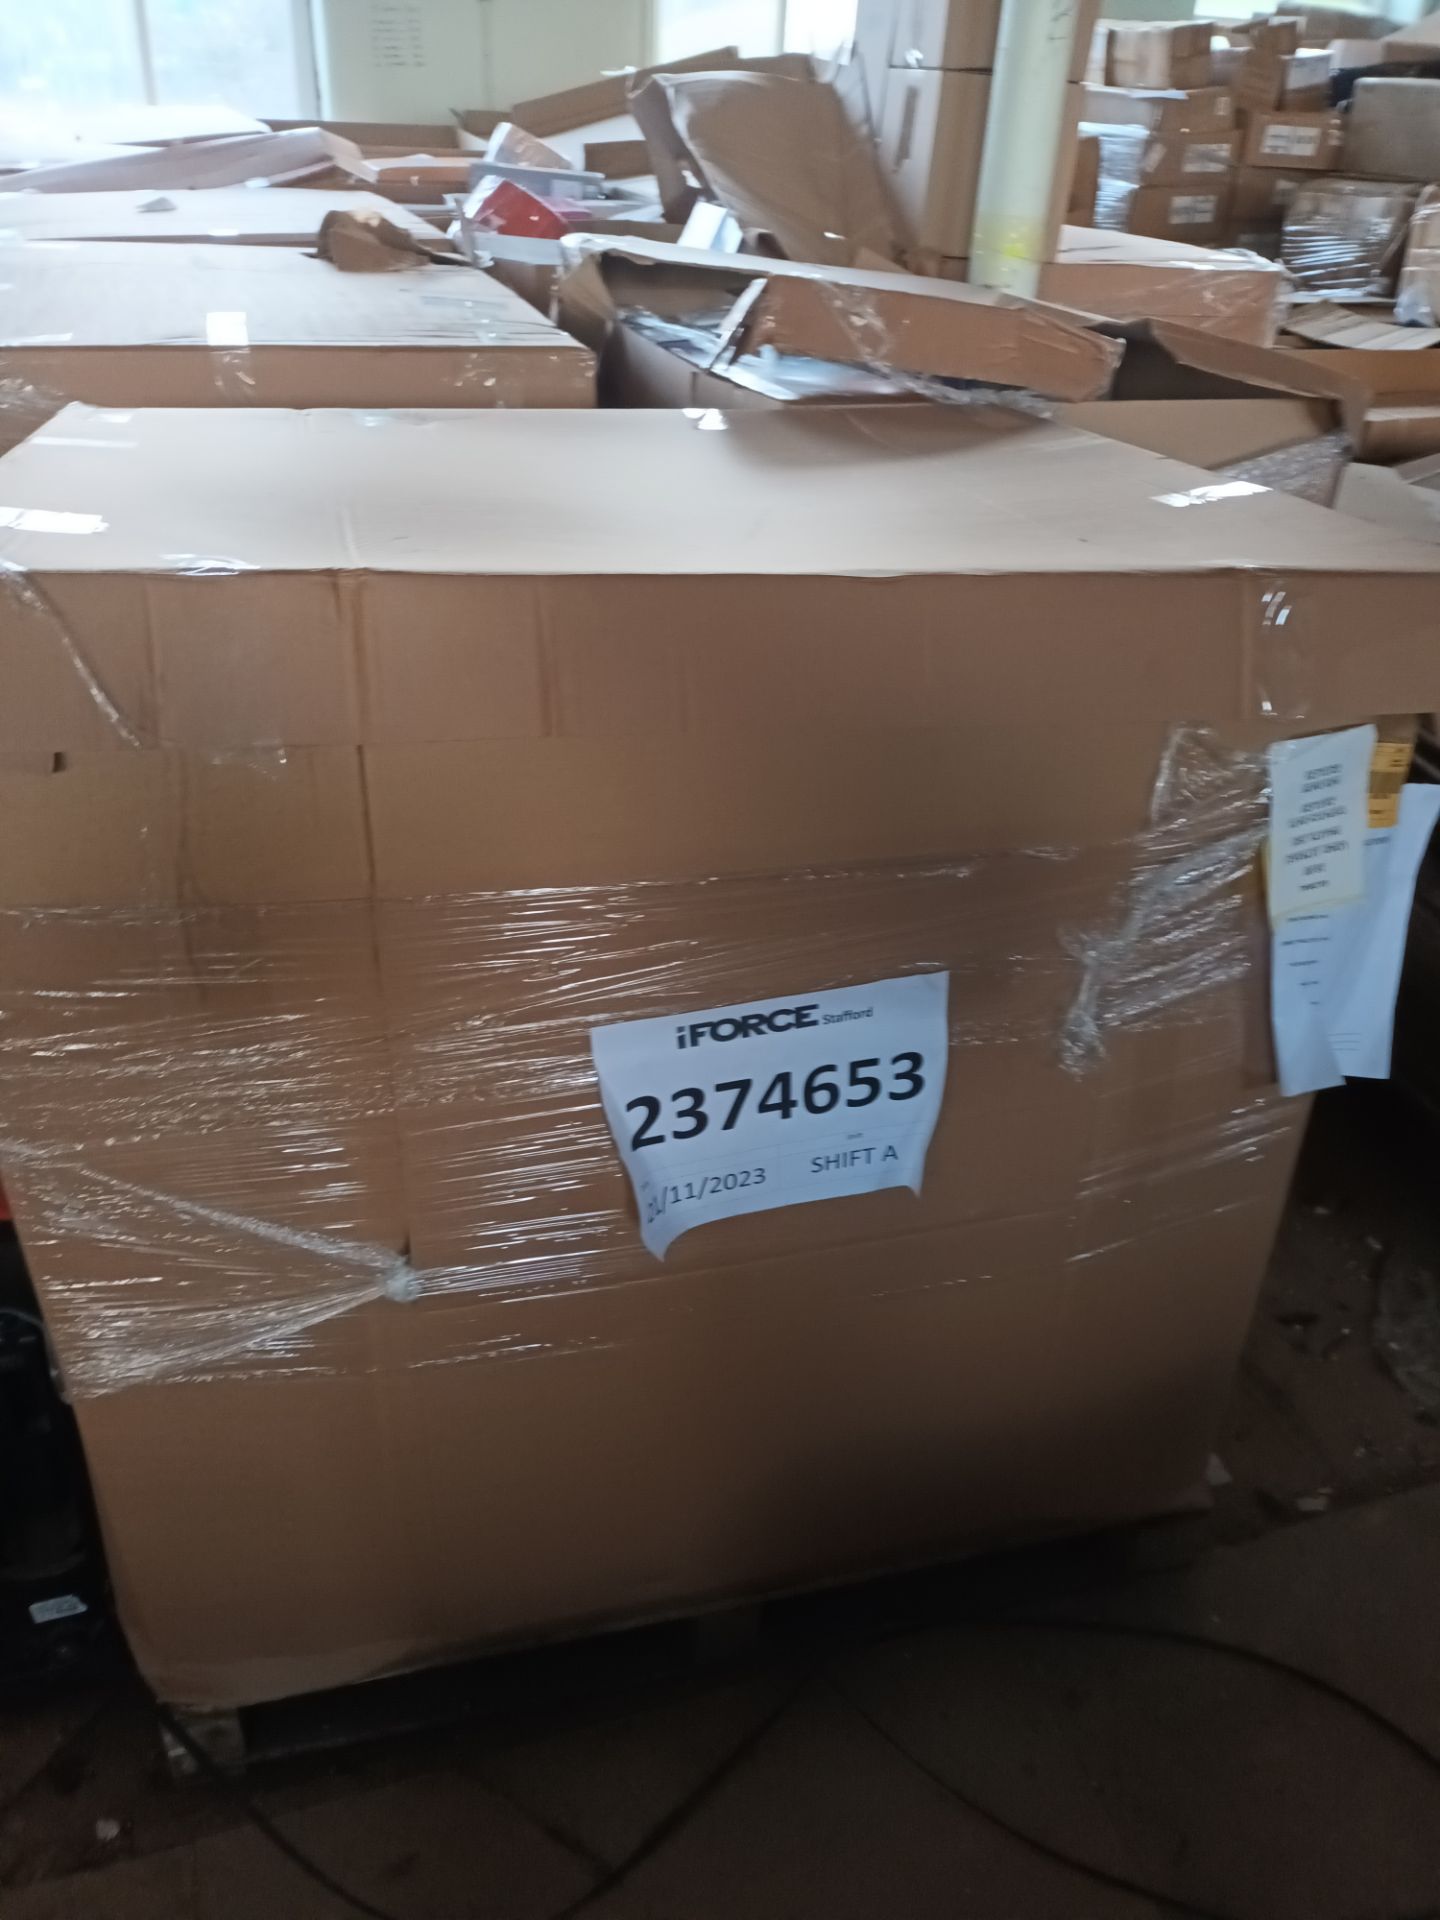 PALLET OF BRAND NEW STOCK FROM MAJOR RETAILER - MEGA CLEARANCE DEAL!!!